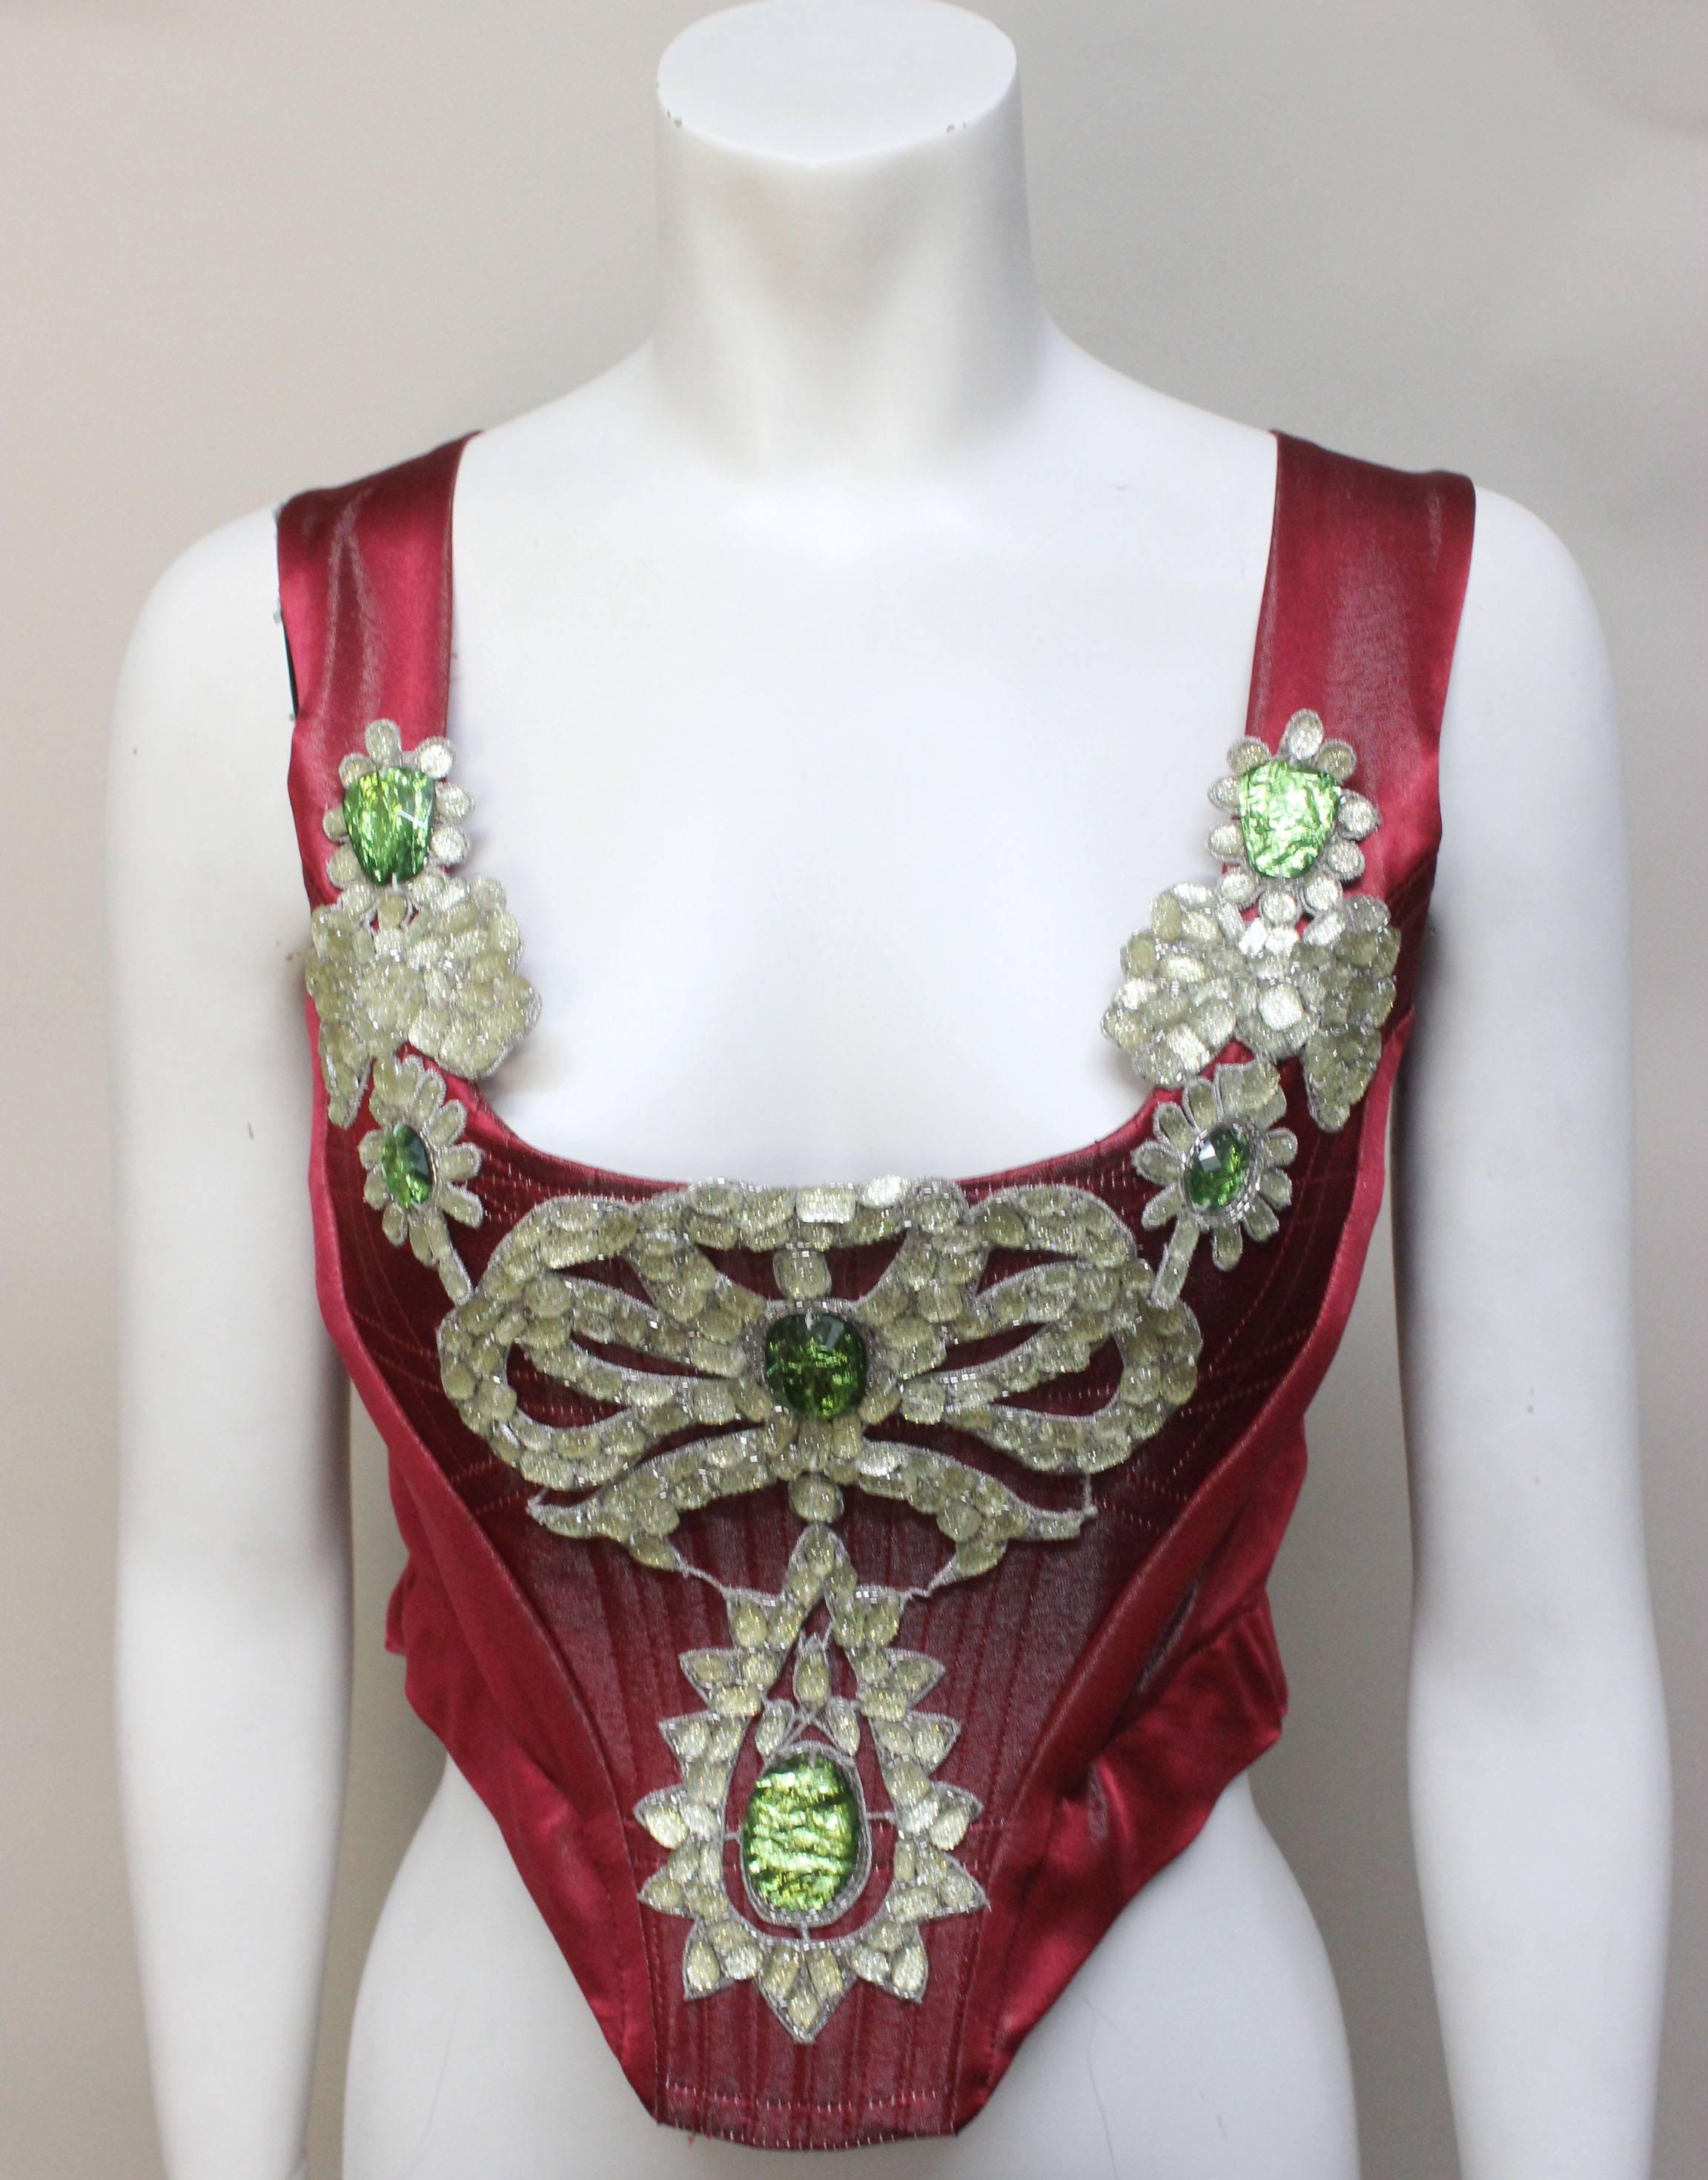 This never worn bejeweled deep scoop neck corset is a delicate and beautiful piece, perfect for the holidays. The front and back are boned, and the front has a light and dark green jewel design on top of the beautiful deep red silk blend. This